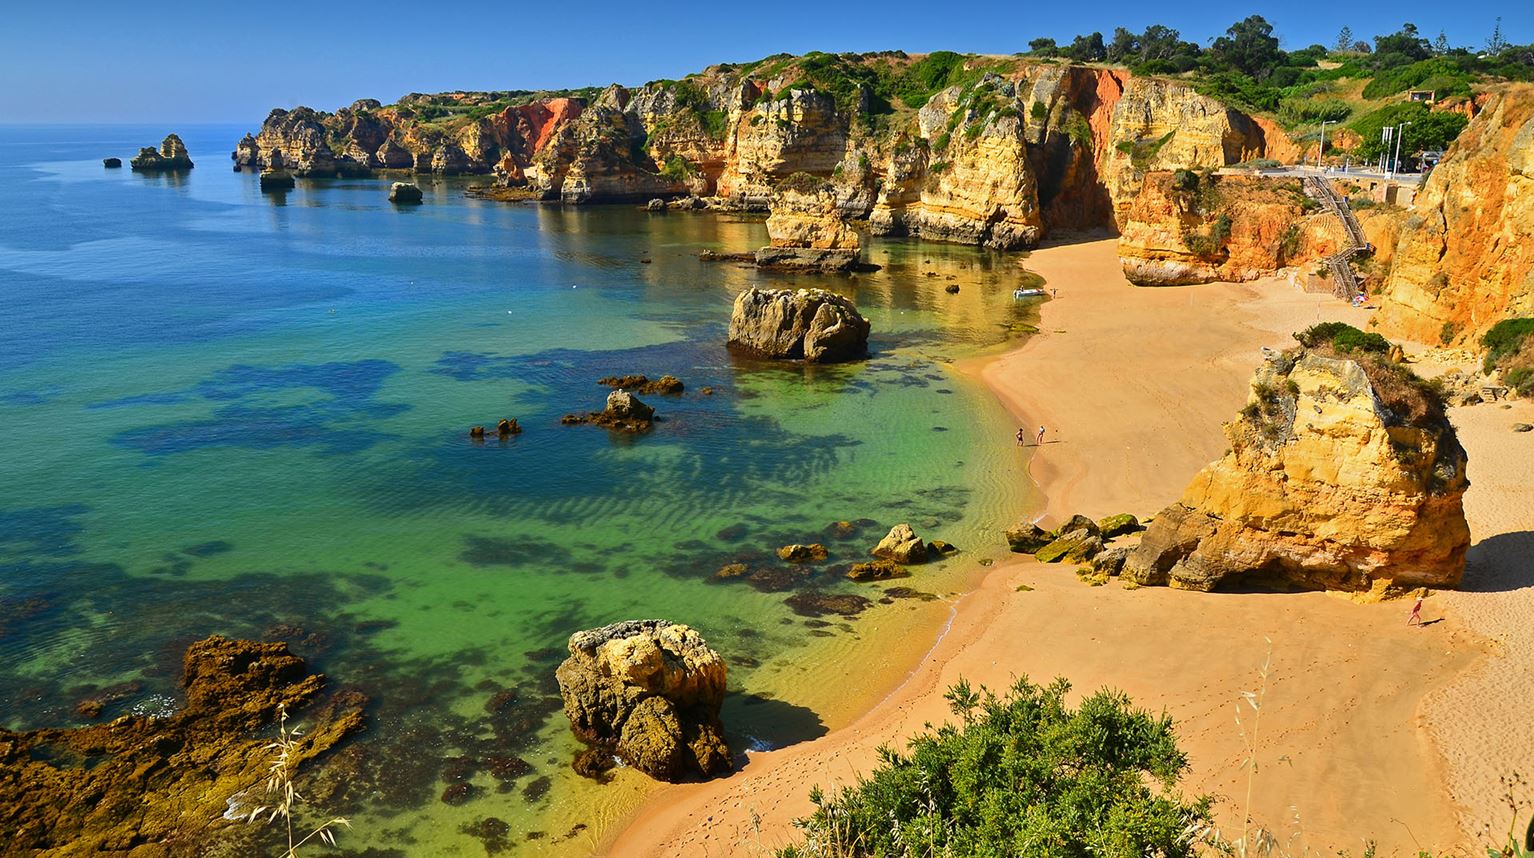 Clear water and shoreline in Dona Ana Beach, Lagos, Algarve 